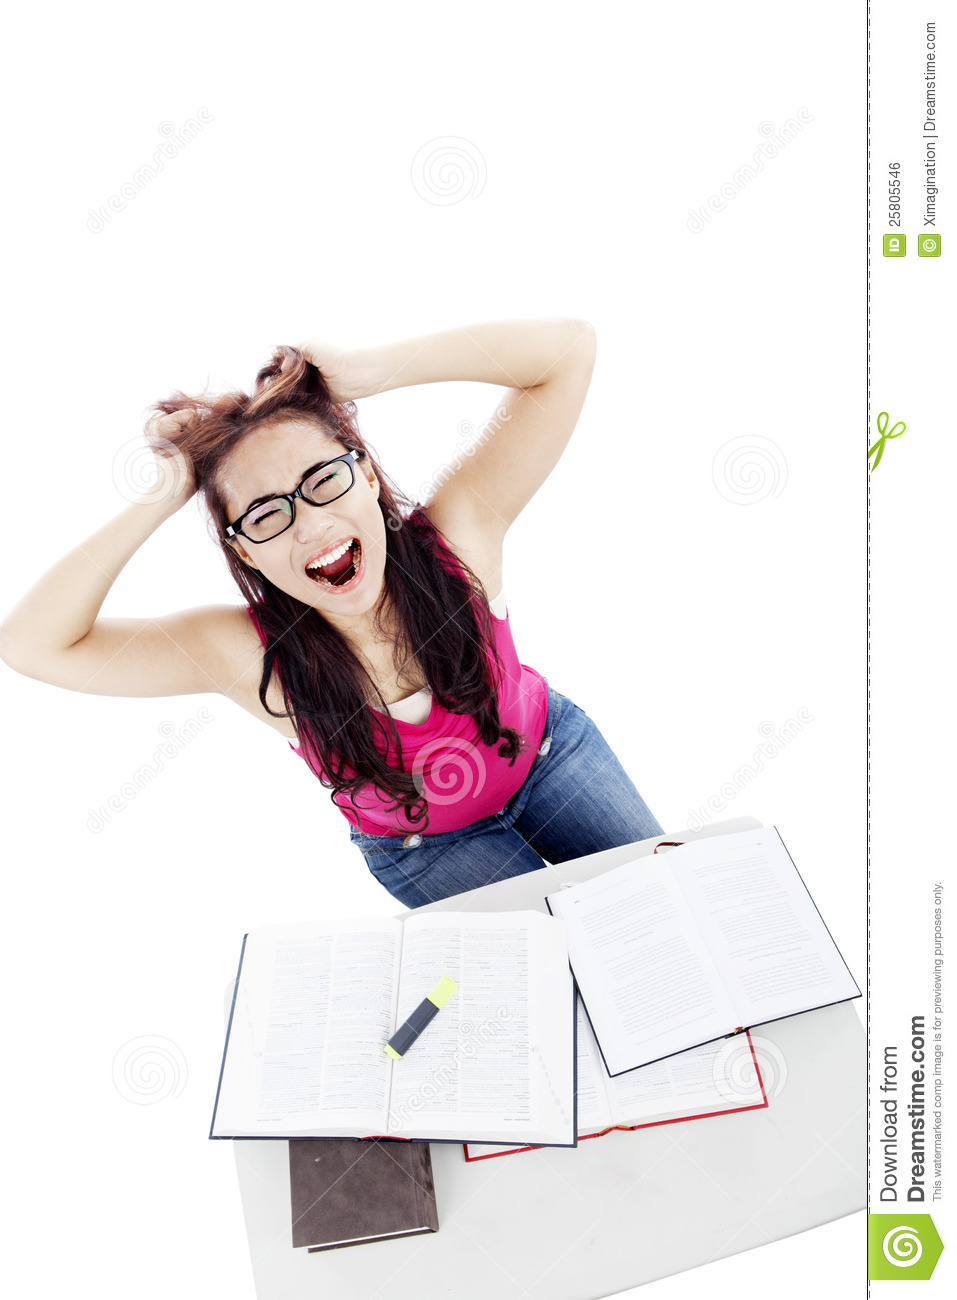 Frustrated College Student Royalty Free Stock Image   Image  25805546